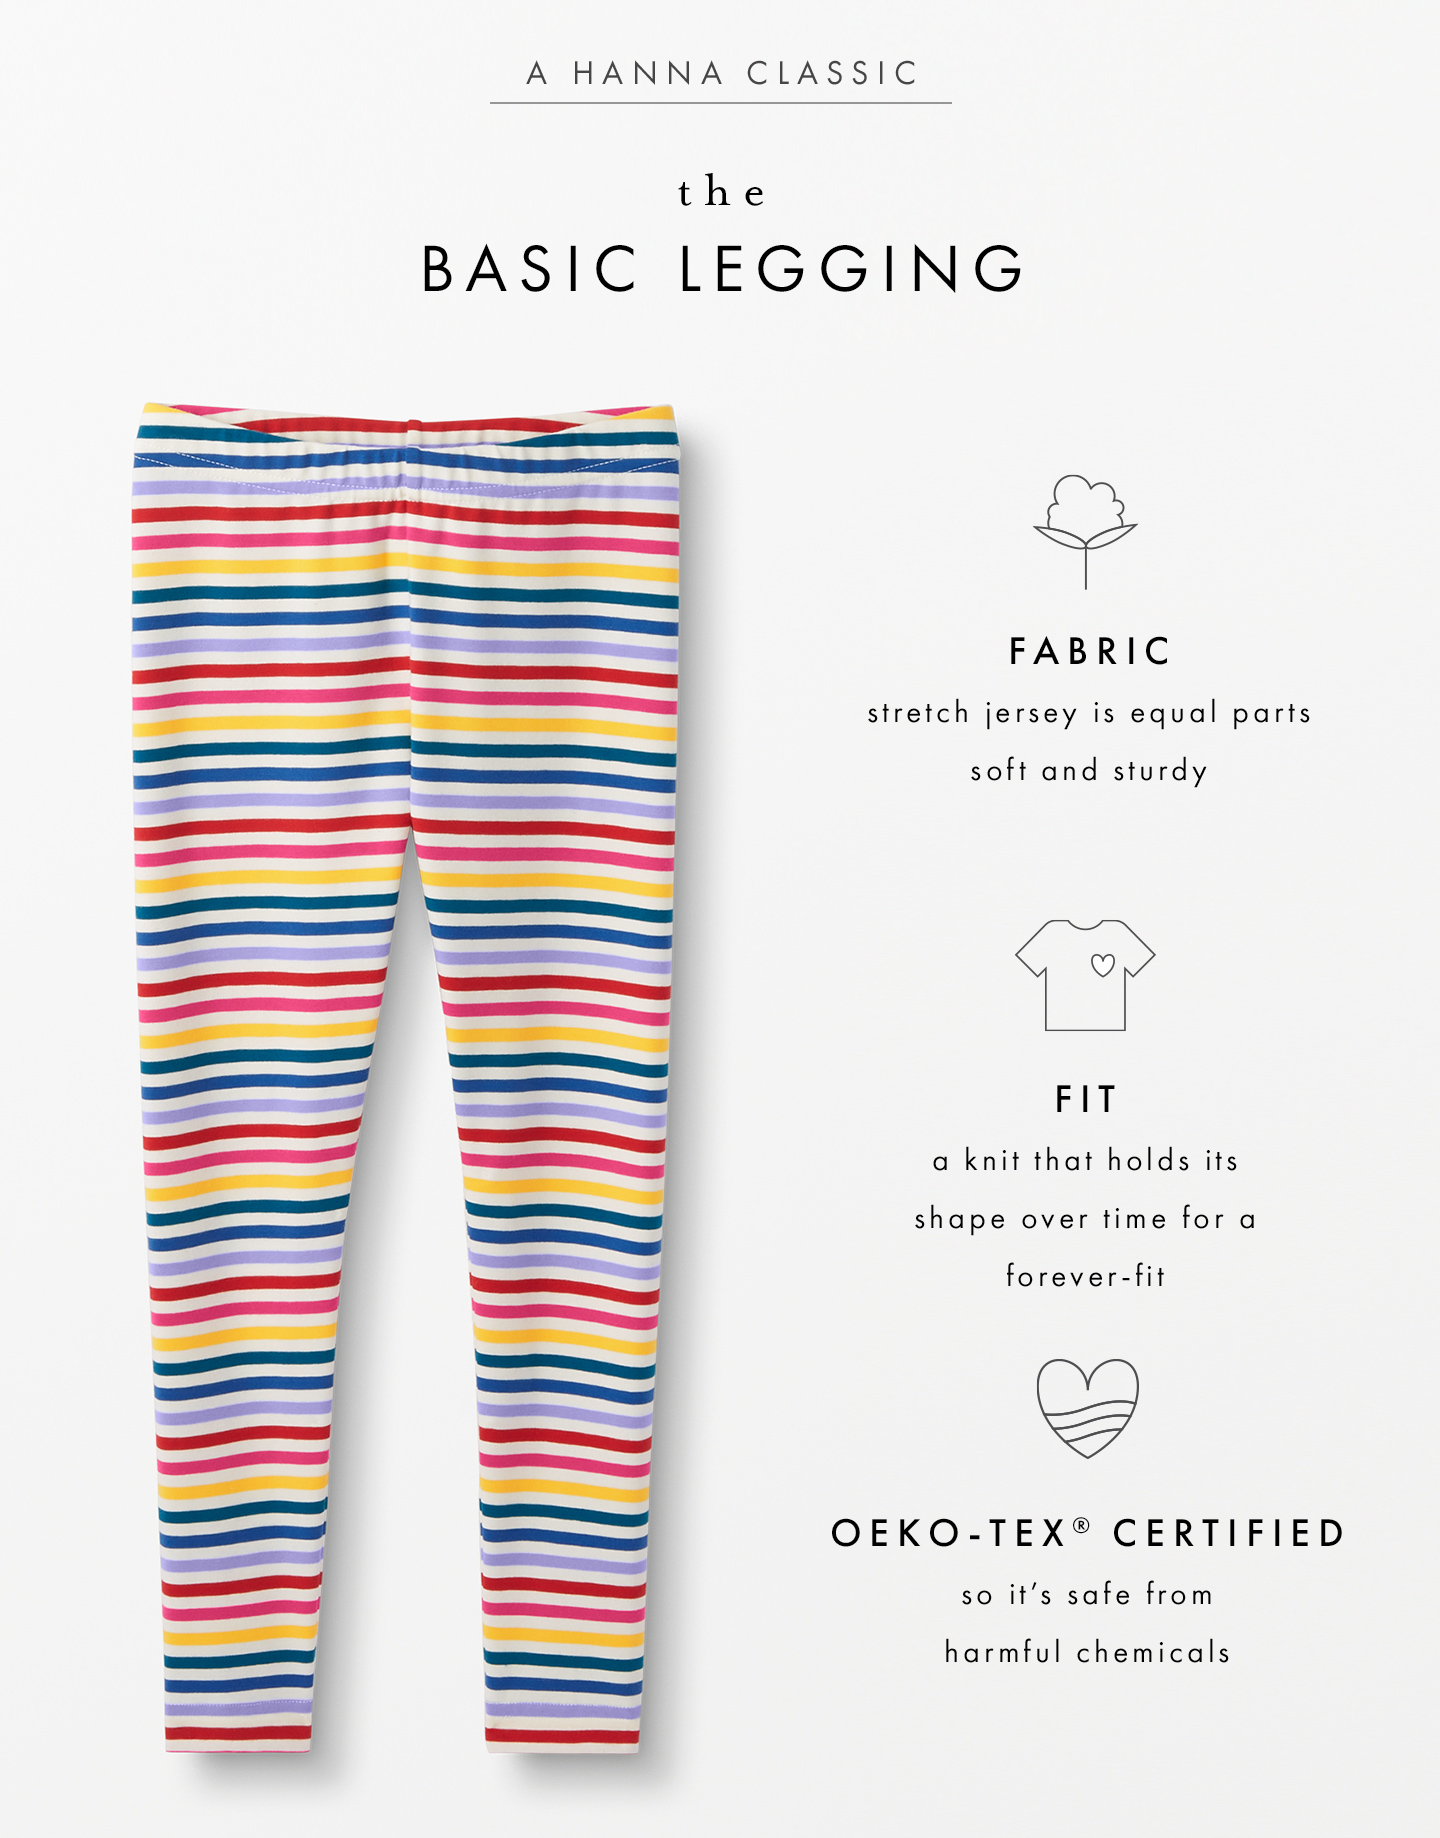 the basic legging is stretchy, hold its fit over time, and is oeko-tek certified